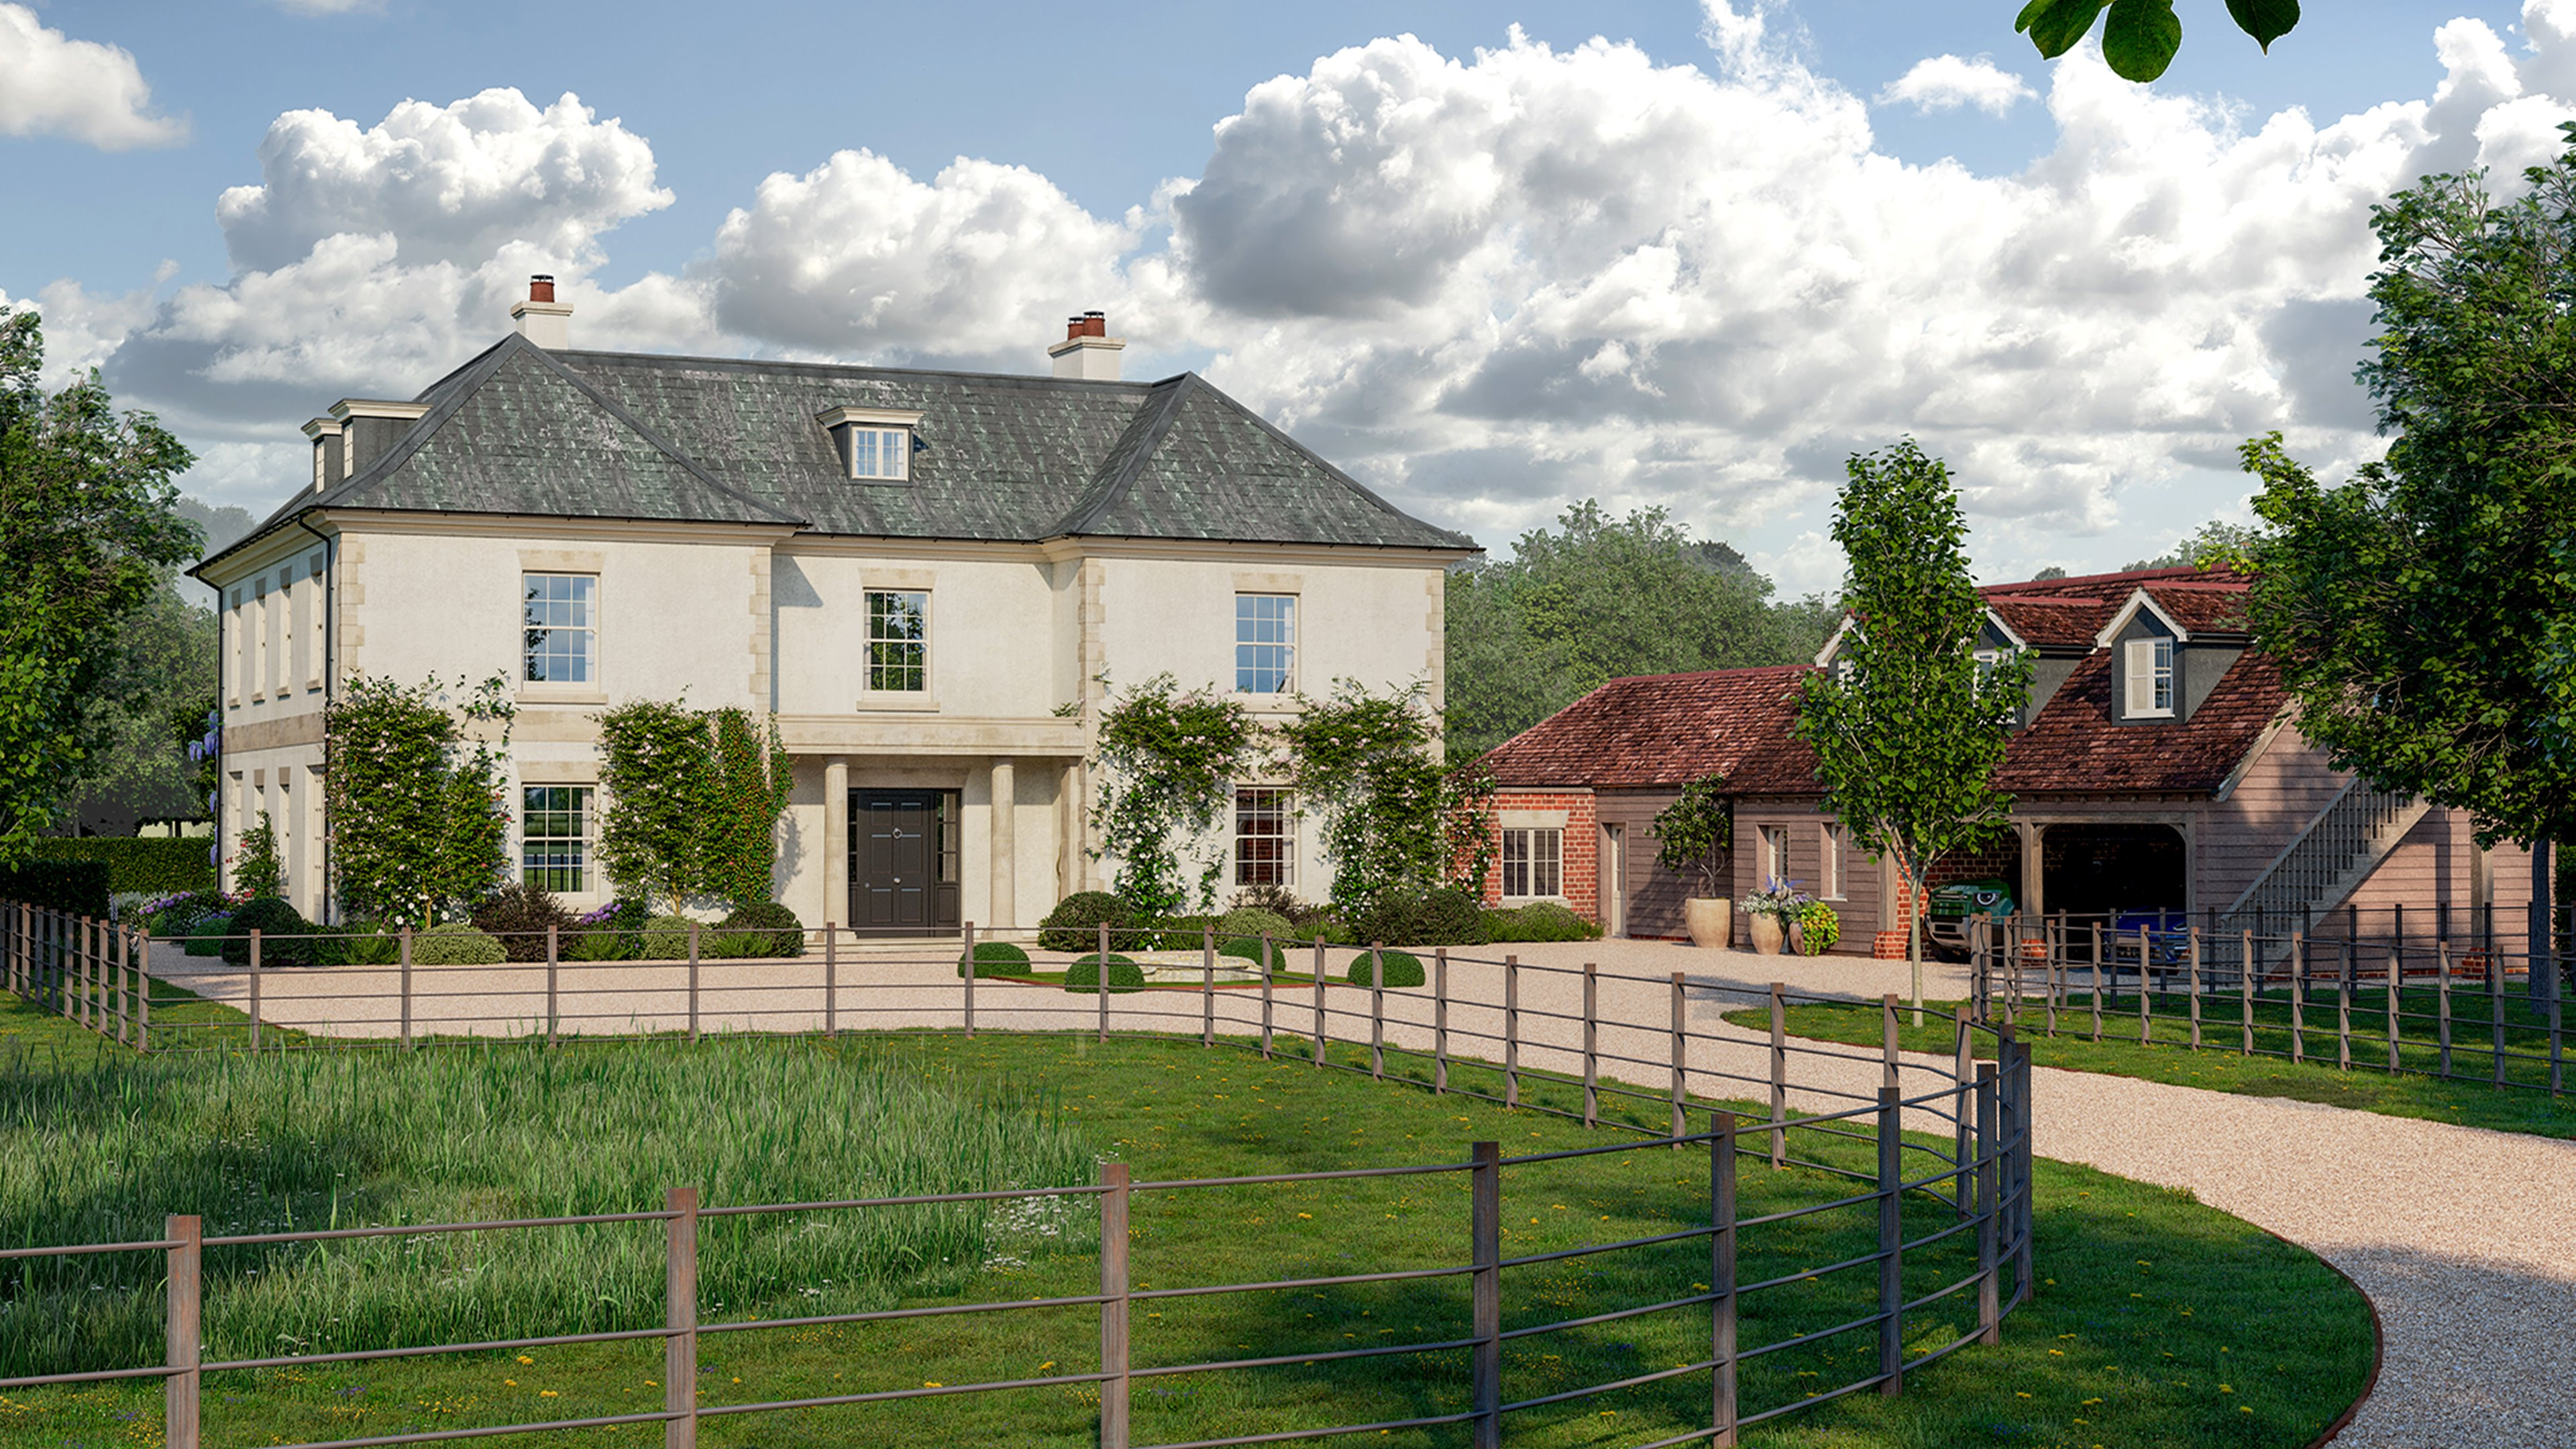 New Country House - Wiltshire Architects - Richmond Bell Architects Wiltshire